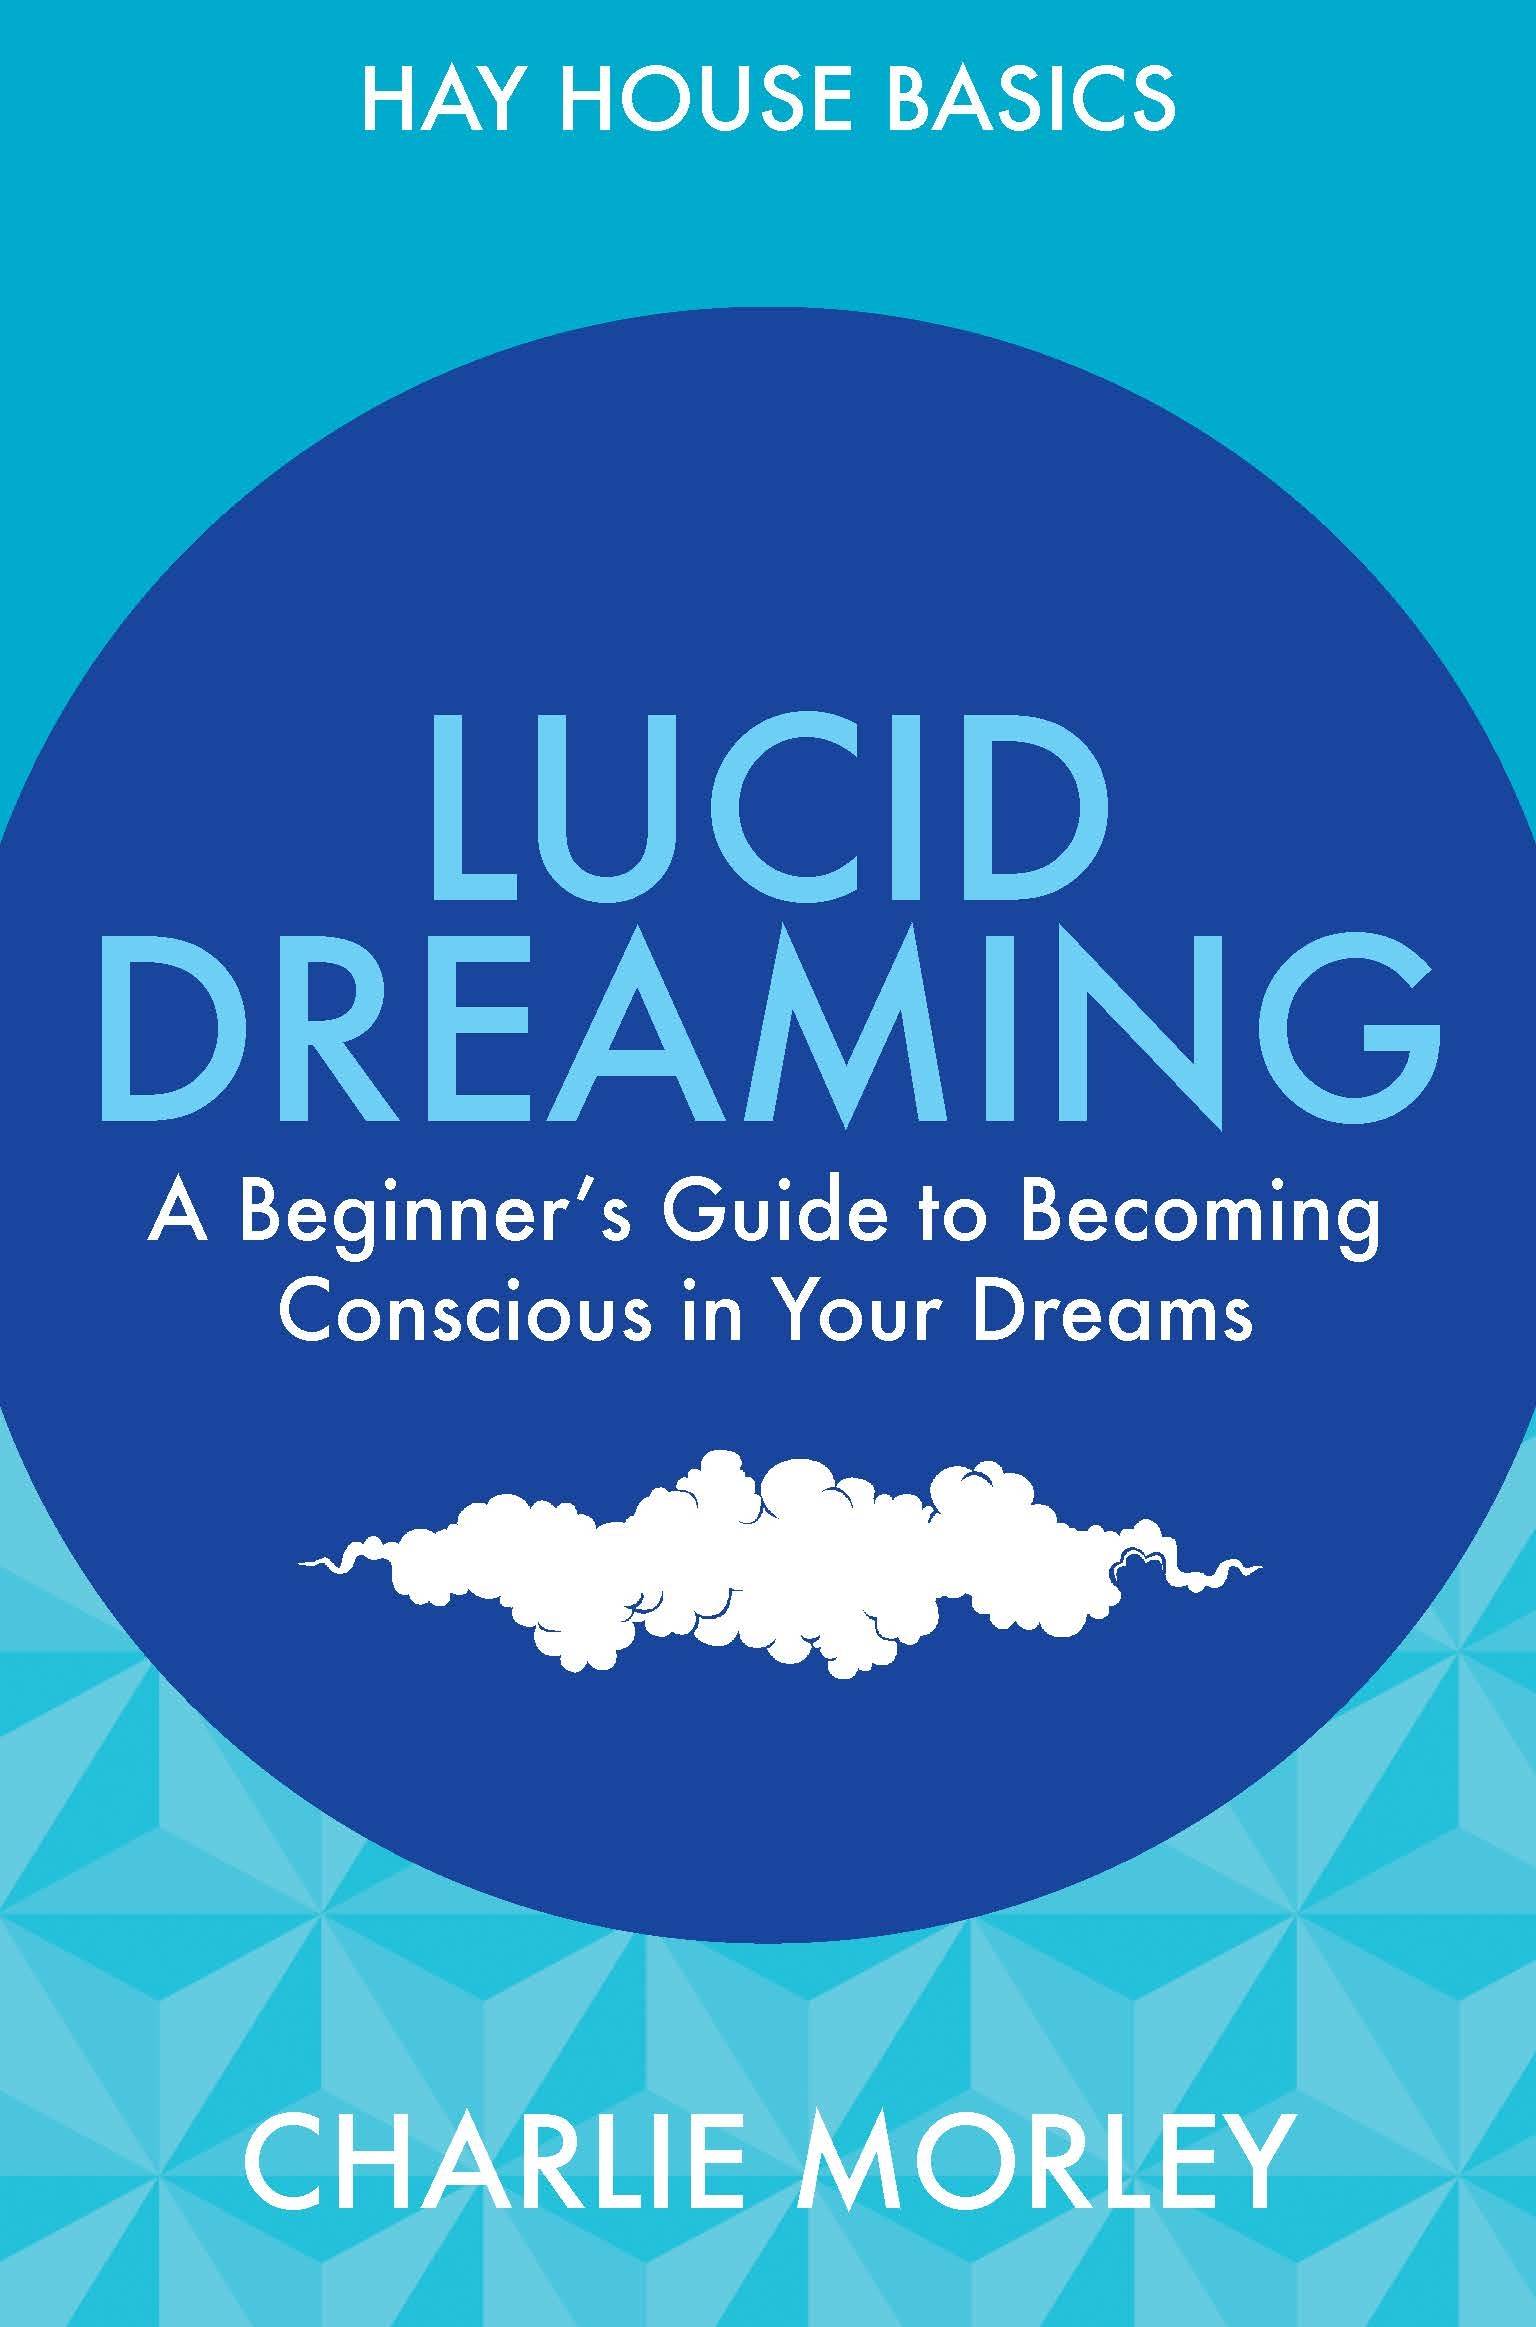 Lucid dreaming - a beginners guide to becoming conscious in your dreams